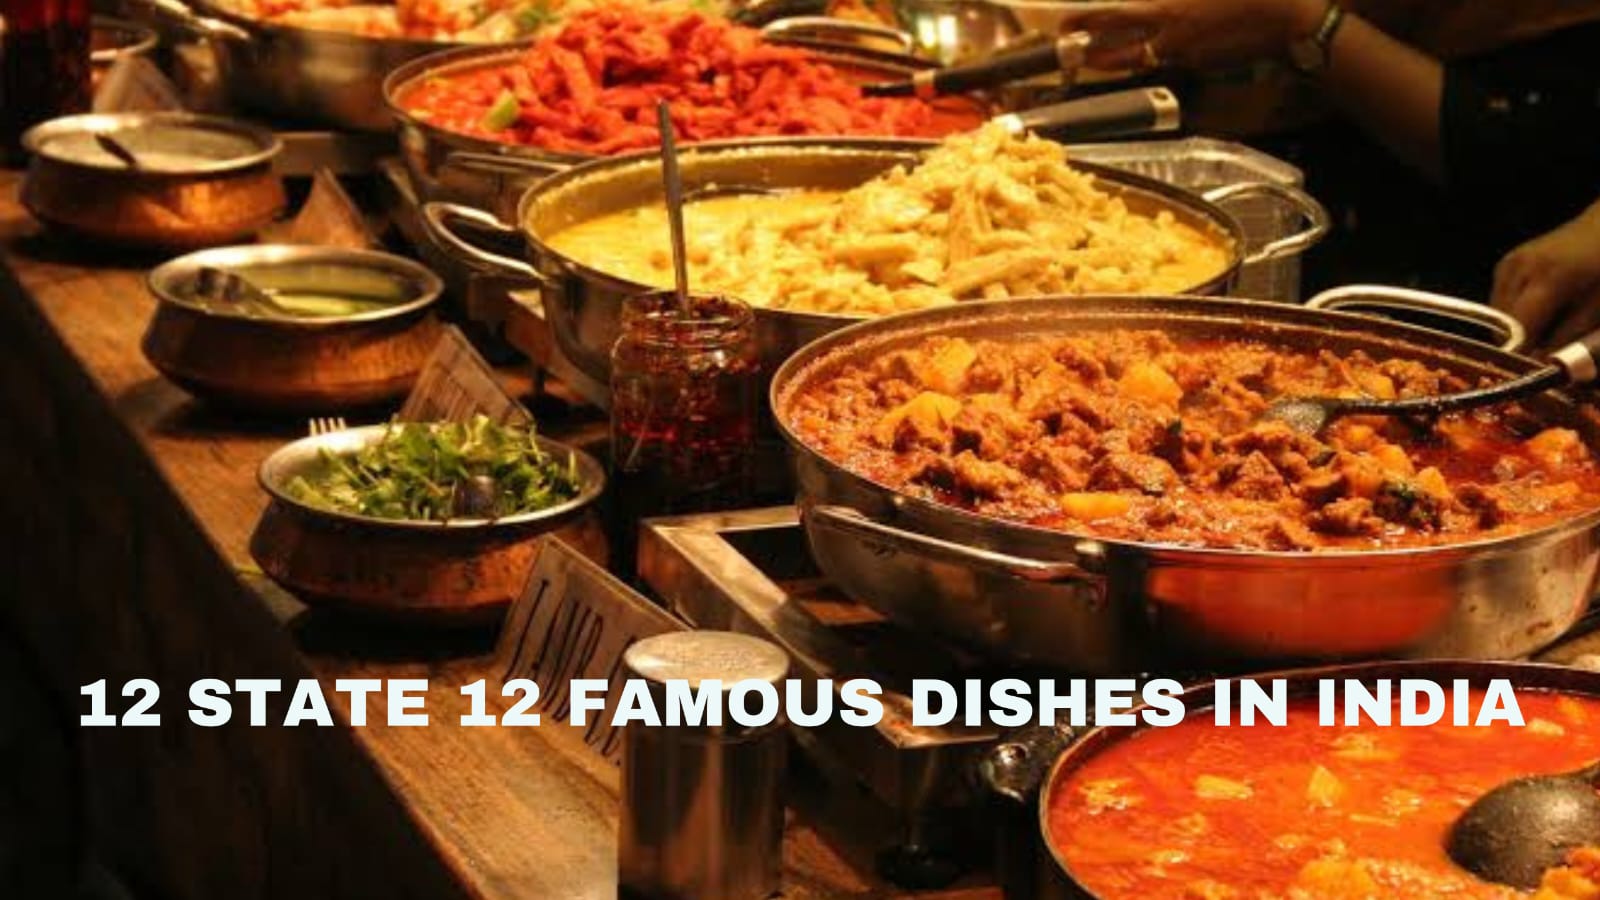 12 States 12 Famous Dishes in India